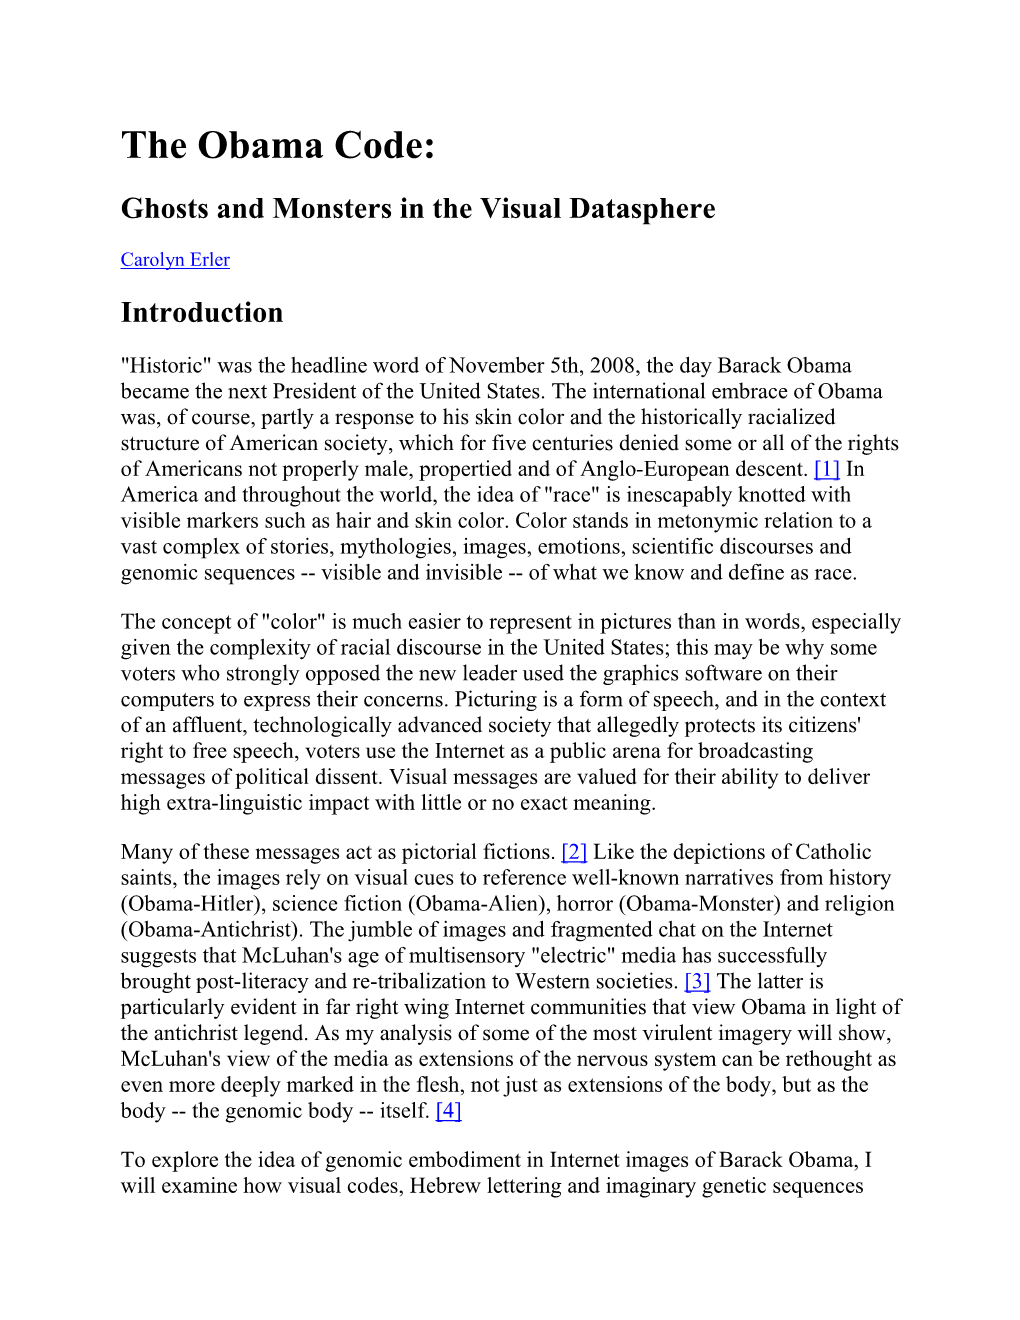 The Obama Code: Ghosts and Monsters in the Visual Datasphere